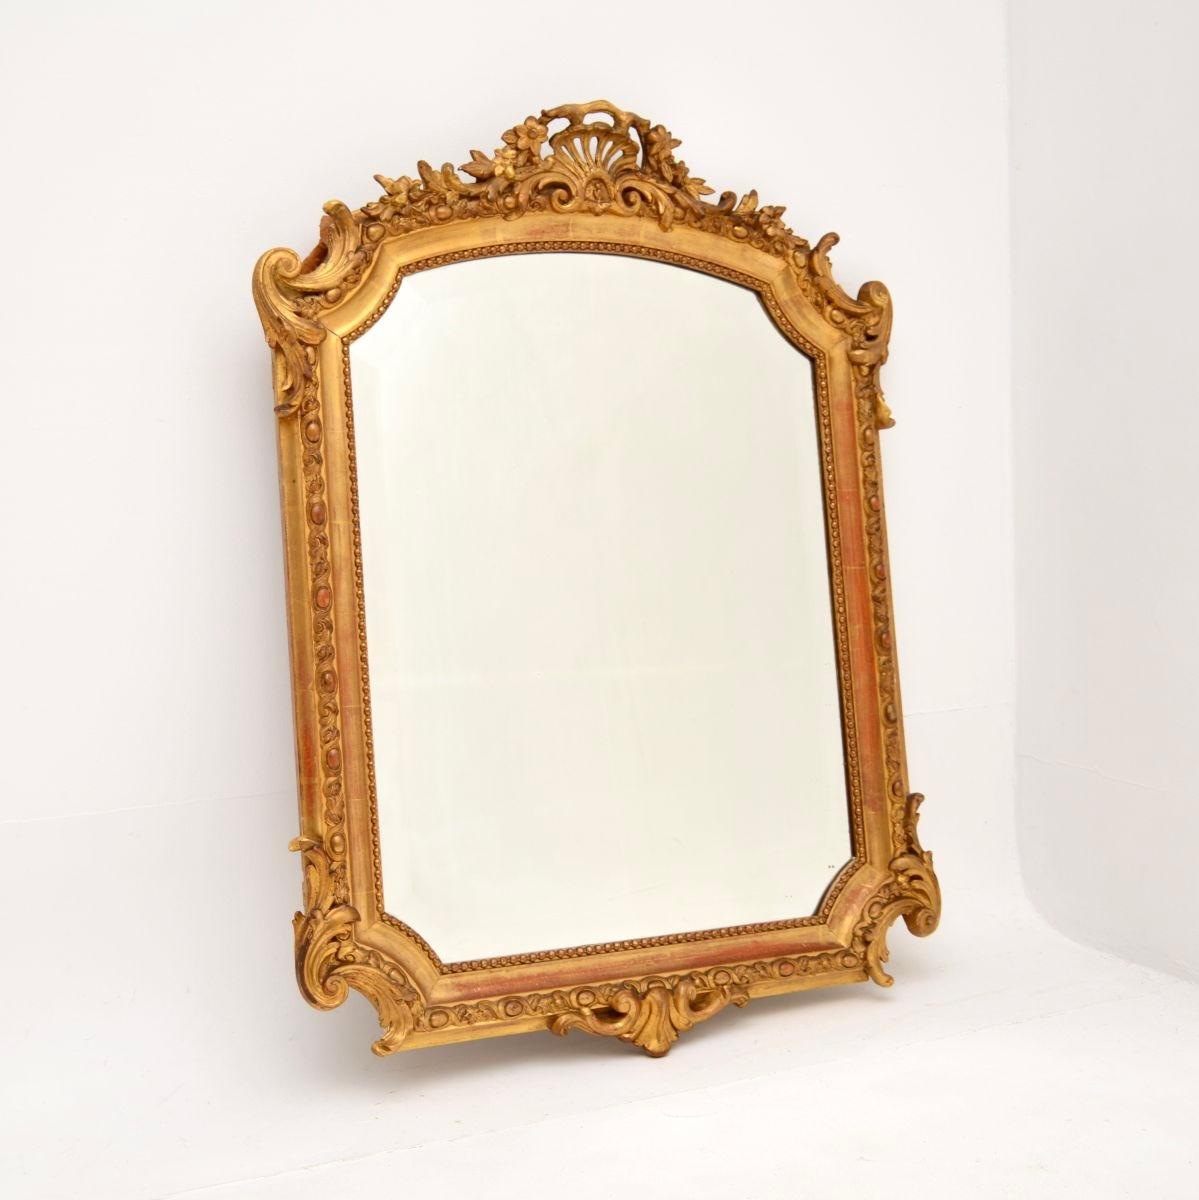 An absolutely stunning and extremely well made antique French gilt wood mirror, dating from around the 1860-1880’s period.

The quality is outstanding, this is made from a mix of solid wood and gesso, with a gorgeous gilded finish around the